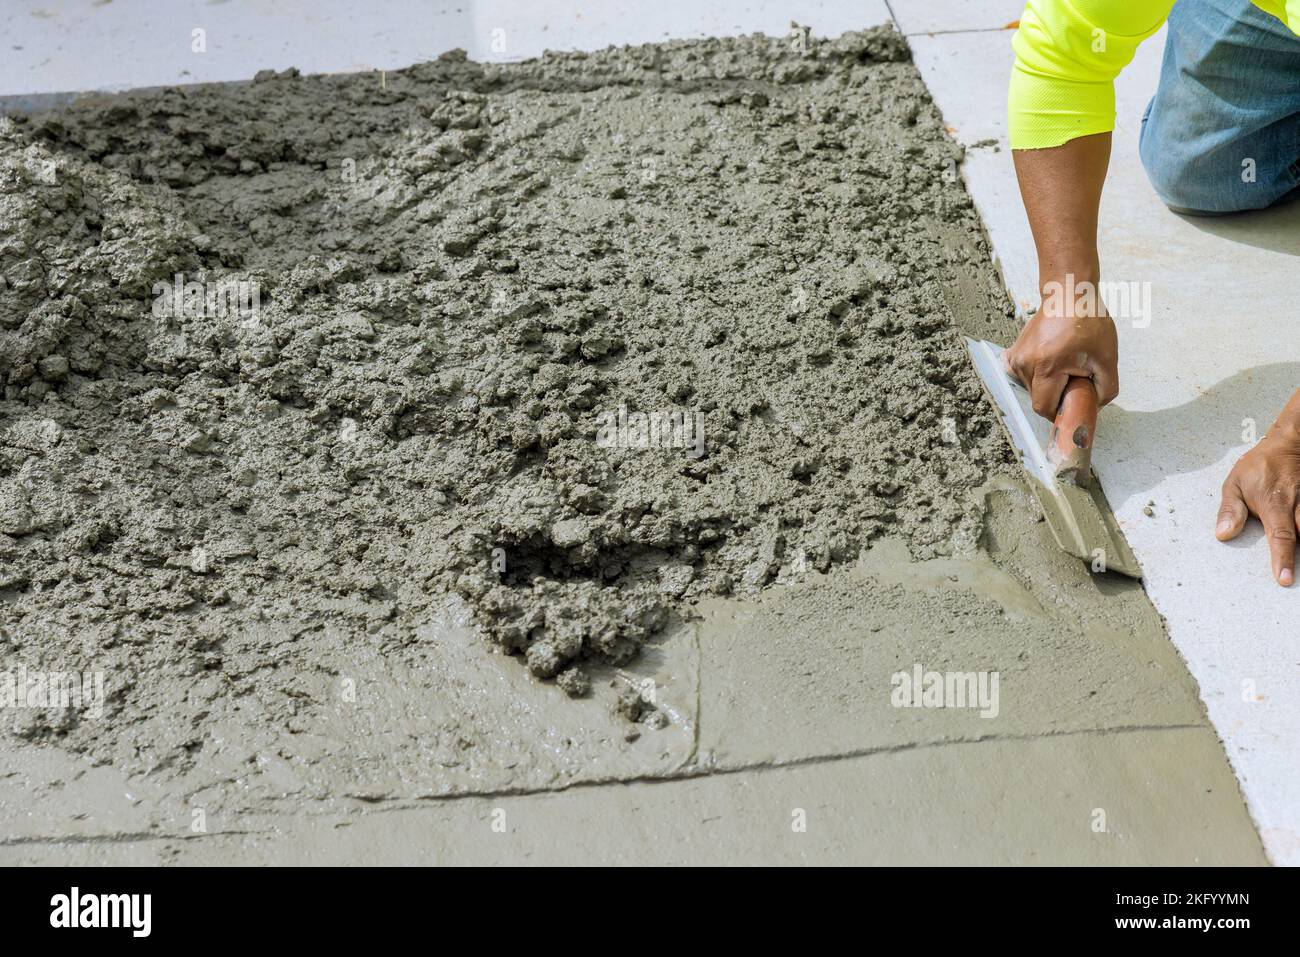 Worker is holding steel trowel as he smoothes and levels newly poured concrete sidewalk in construction area Stock Photo